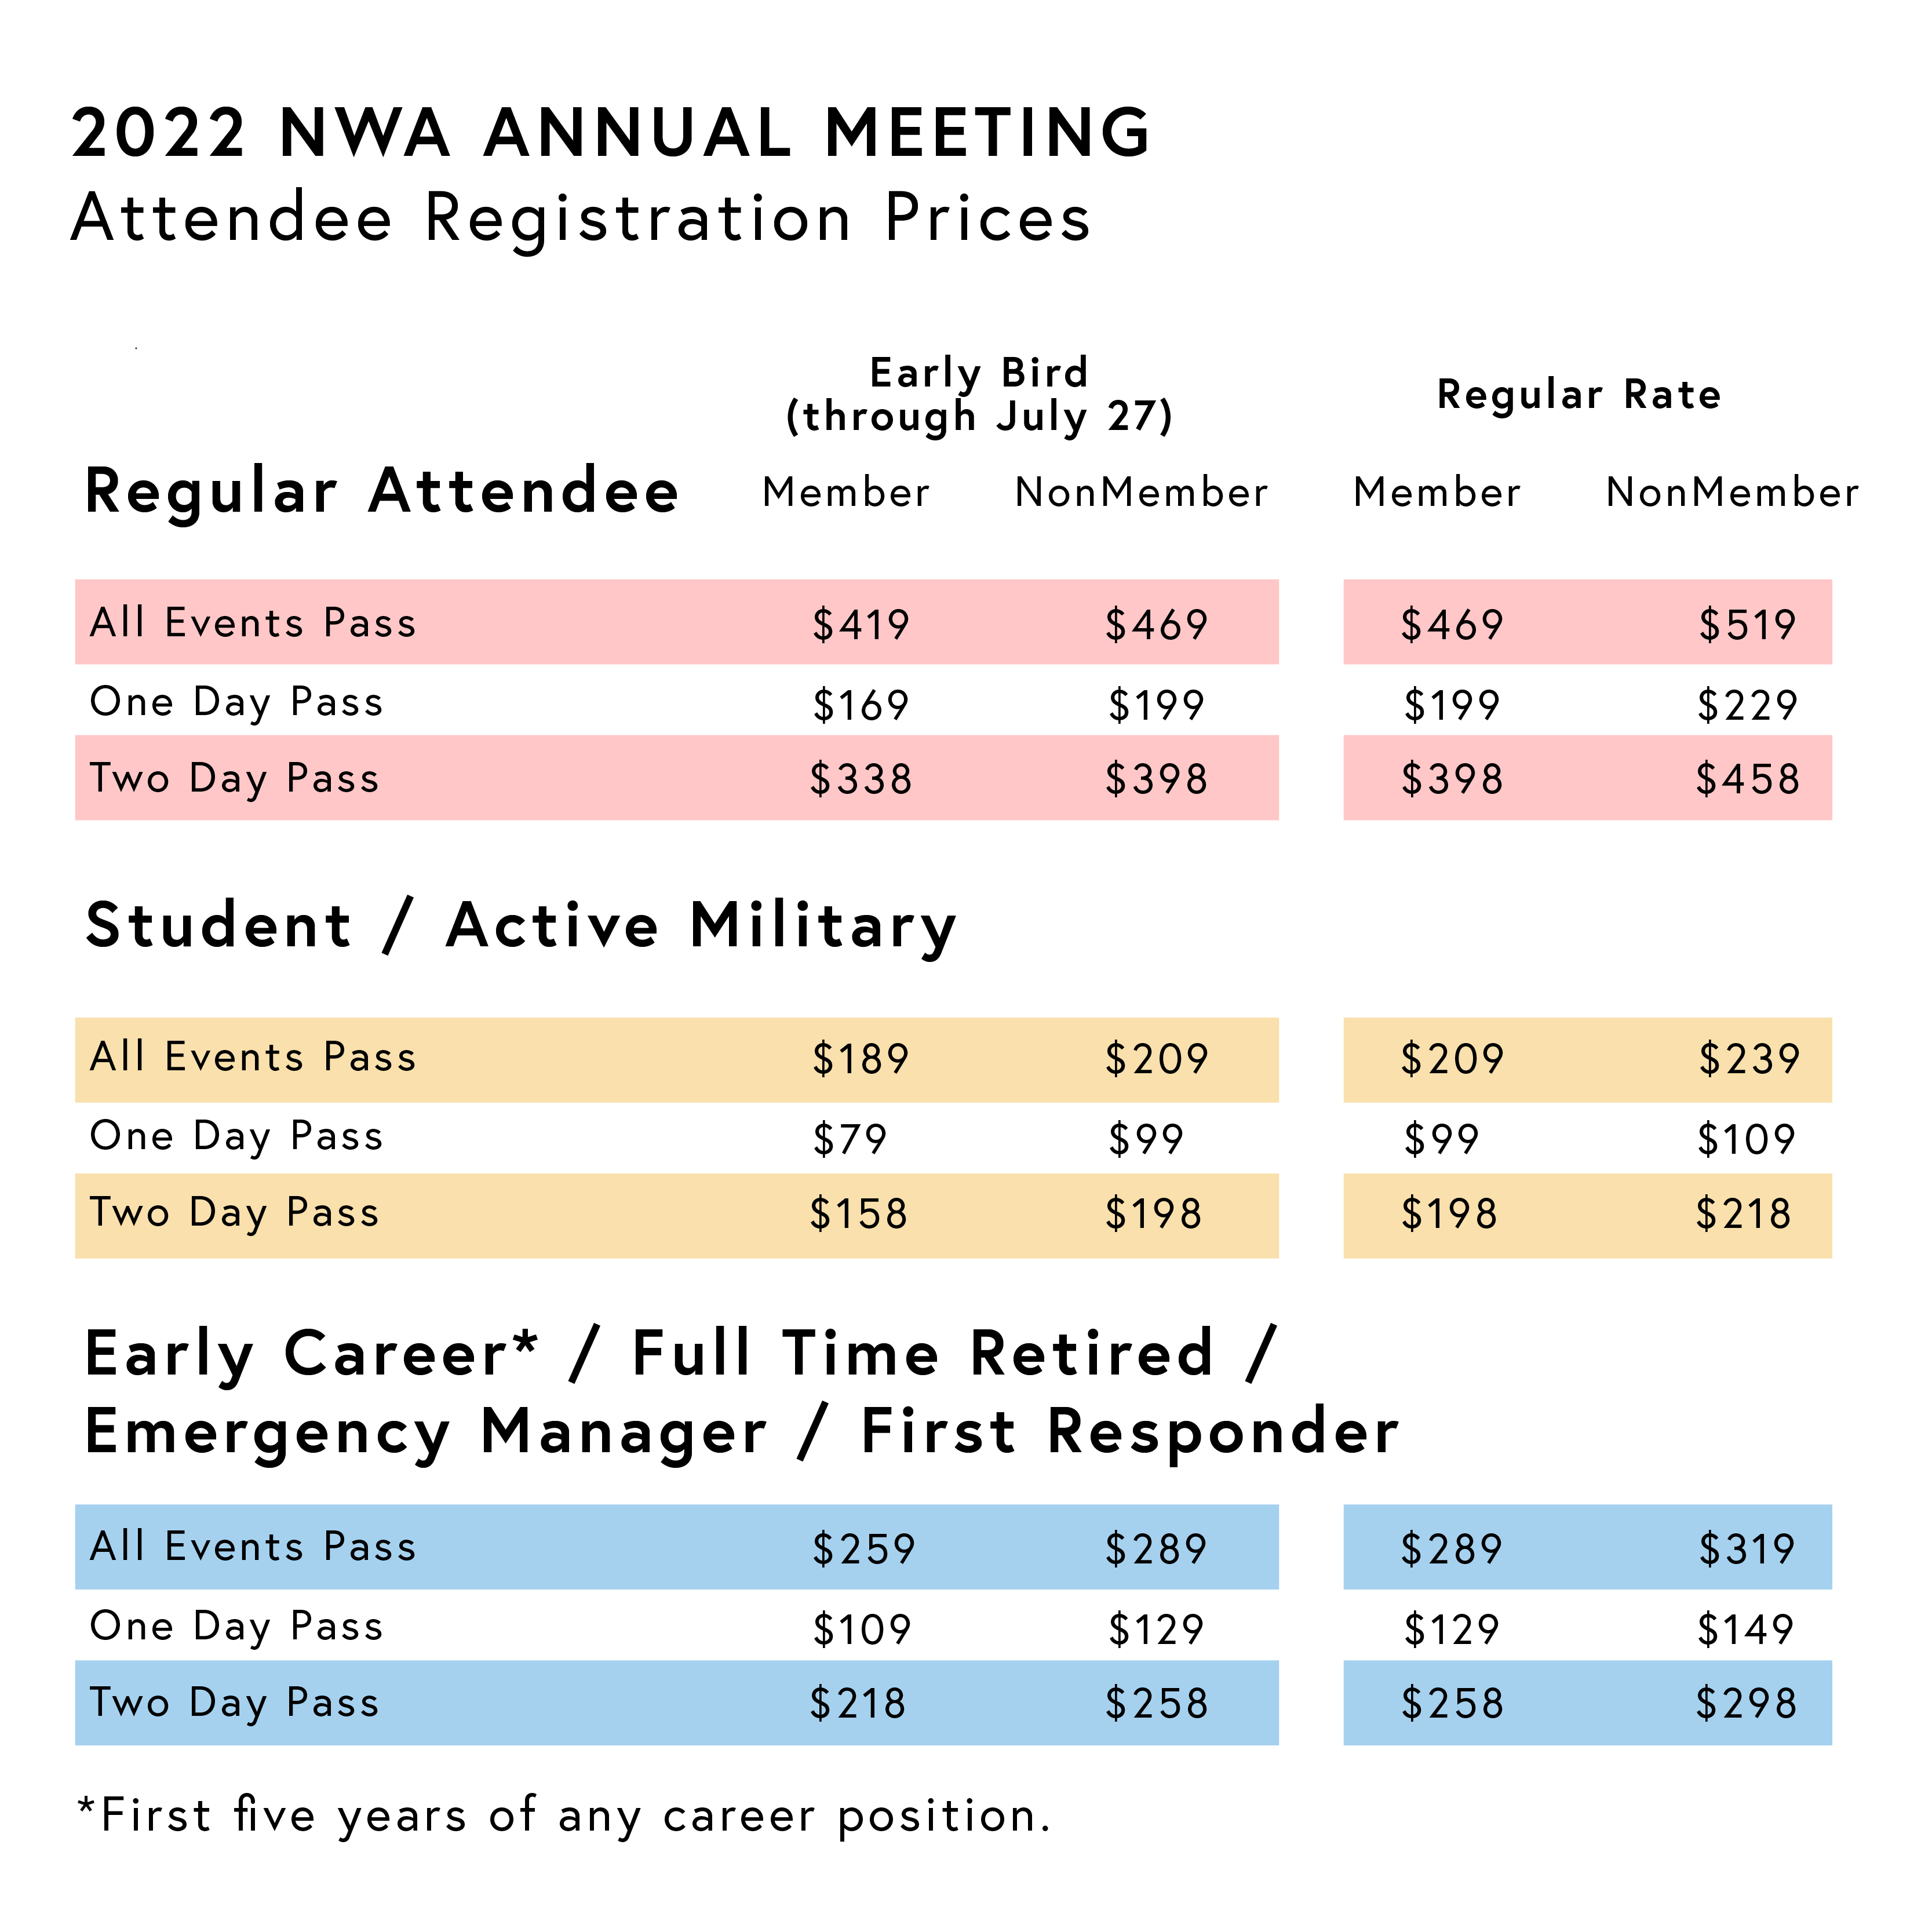 Registration prices for the 2022 Annual Meeting